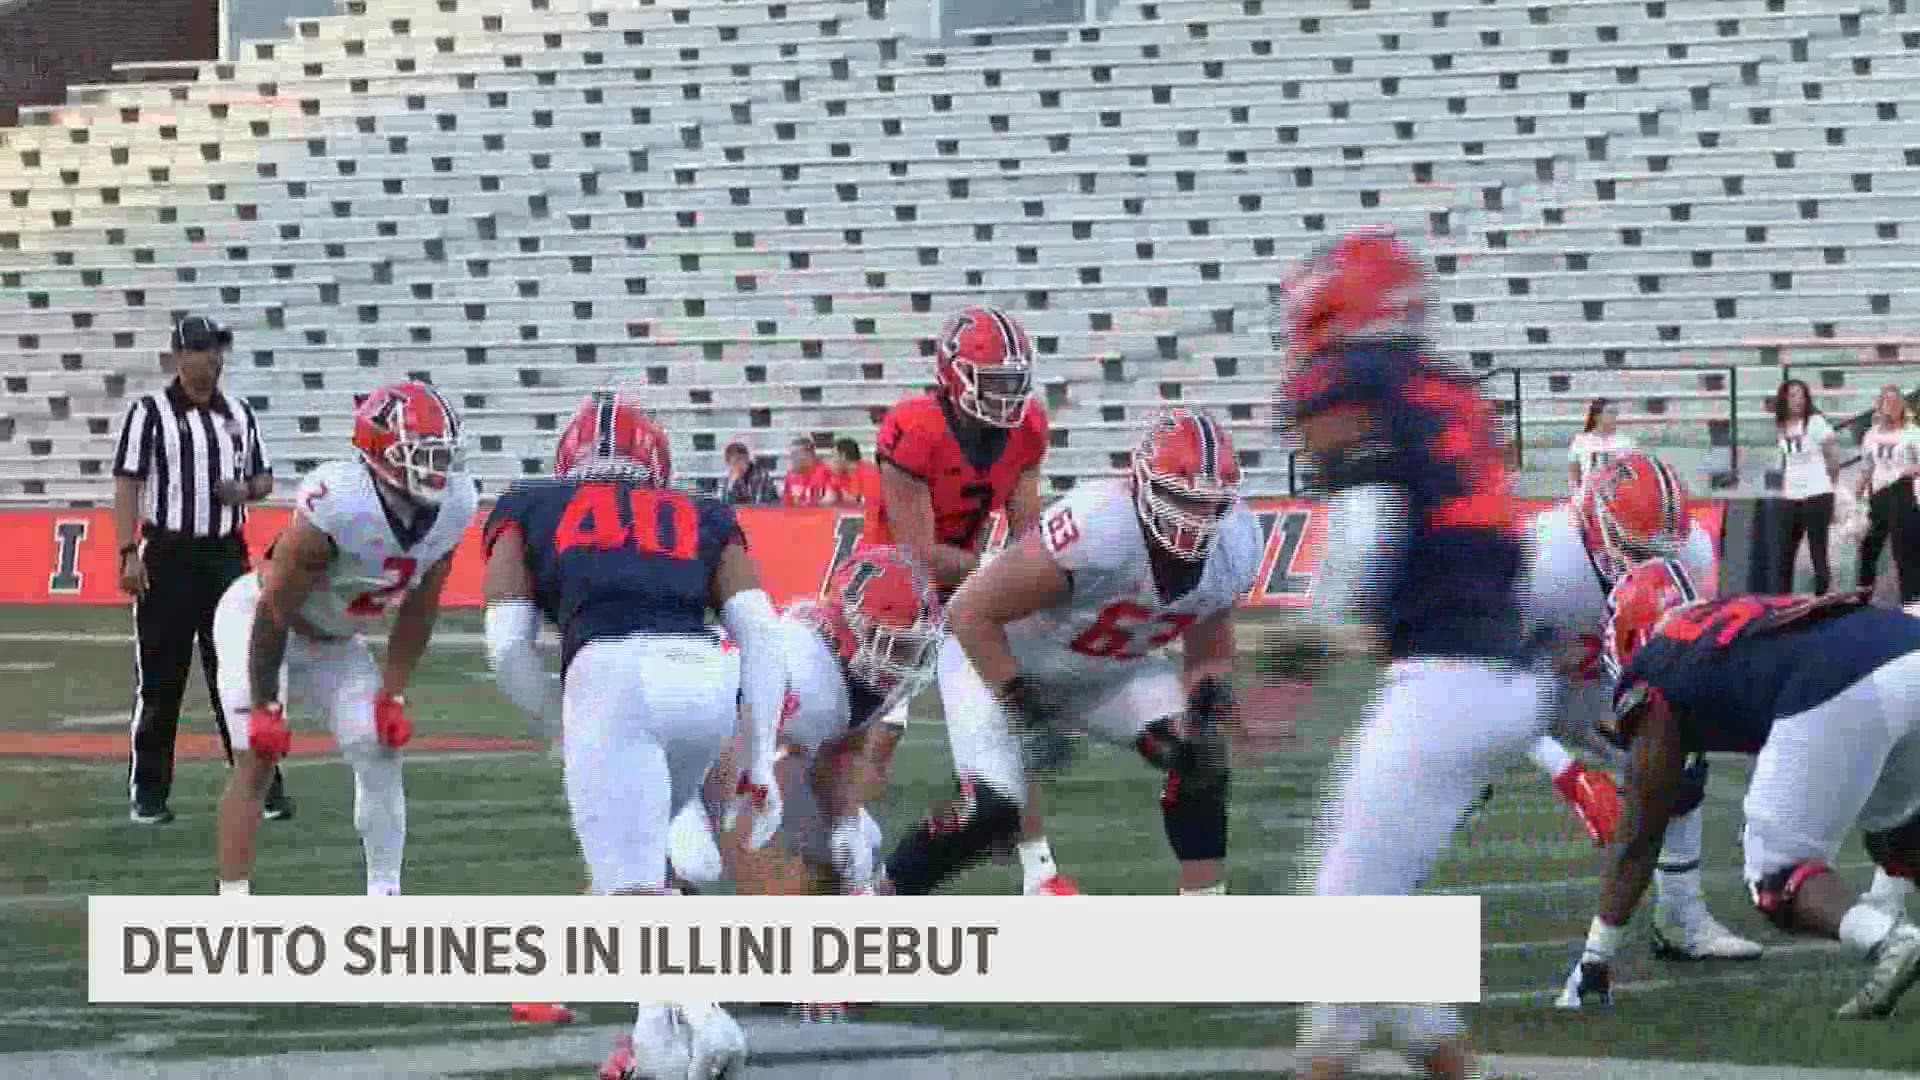 The Syracuse transfer threw for nearly 300 yards and three touchdowns while completing 80% of his passes during the Illini spring camp.